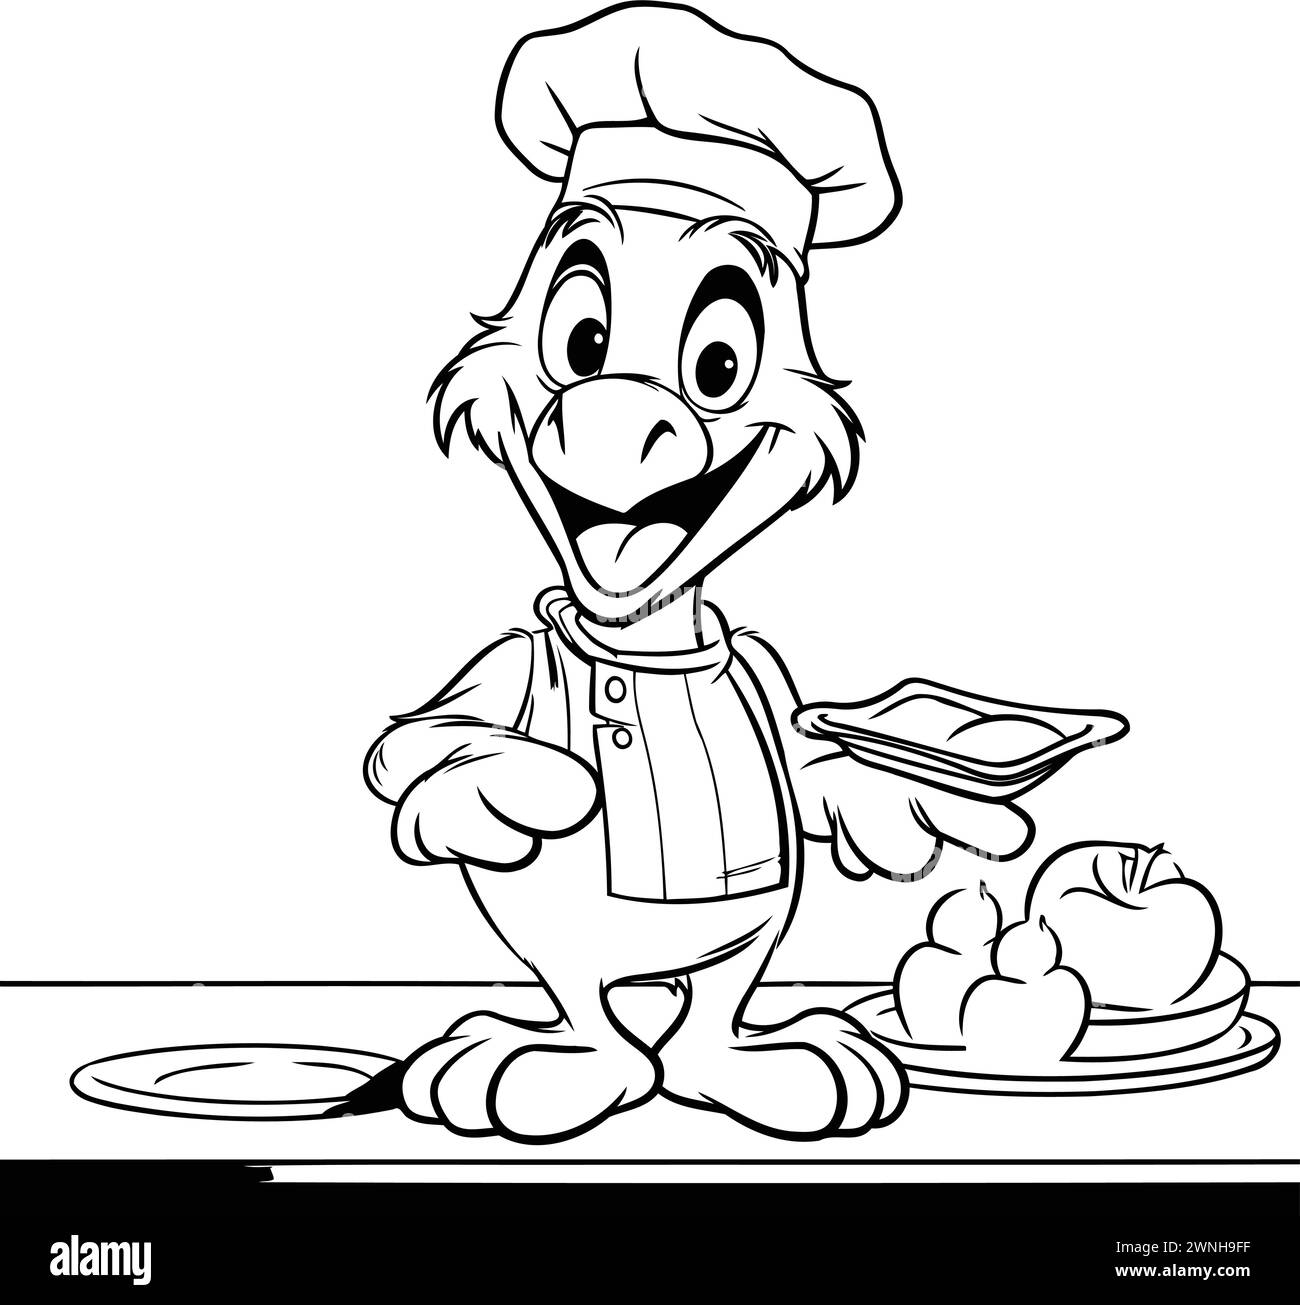 Illustration of a Dog Chef Cartoon Mascot Character Cooking Food Stock Vector